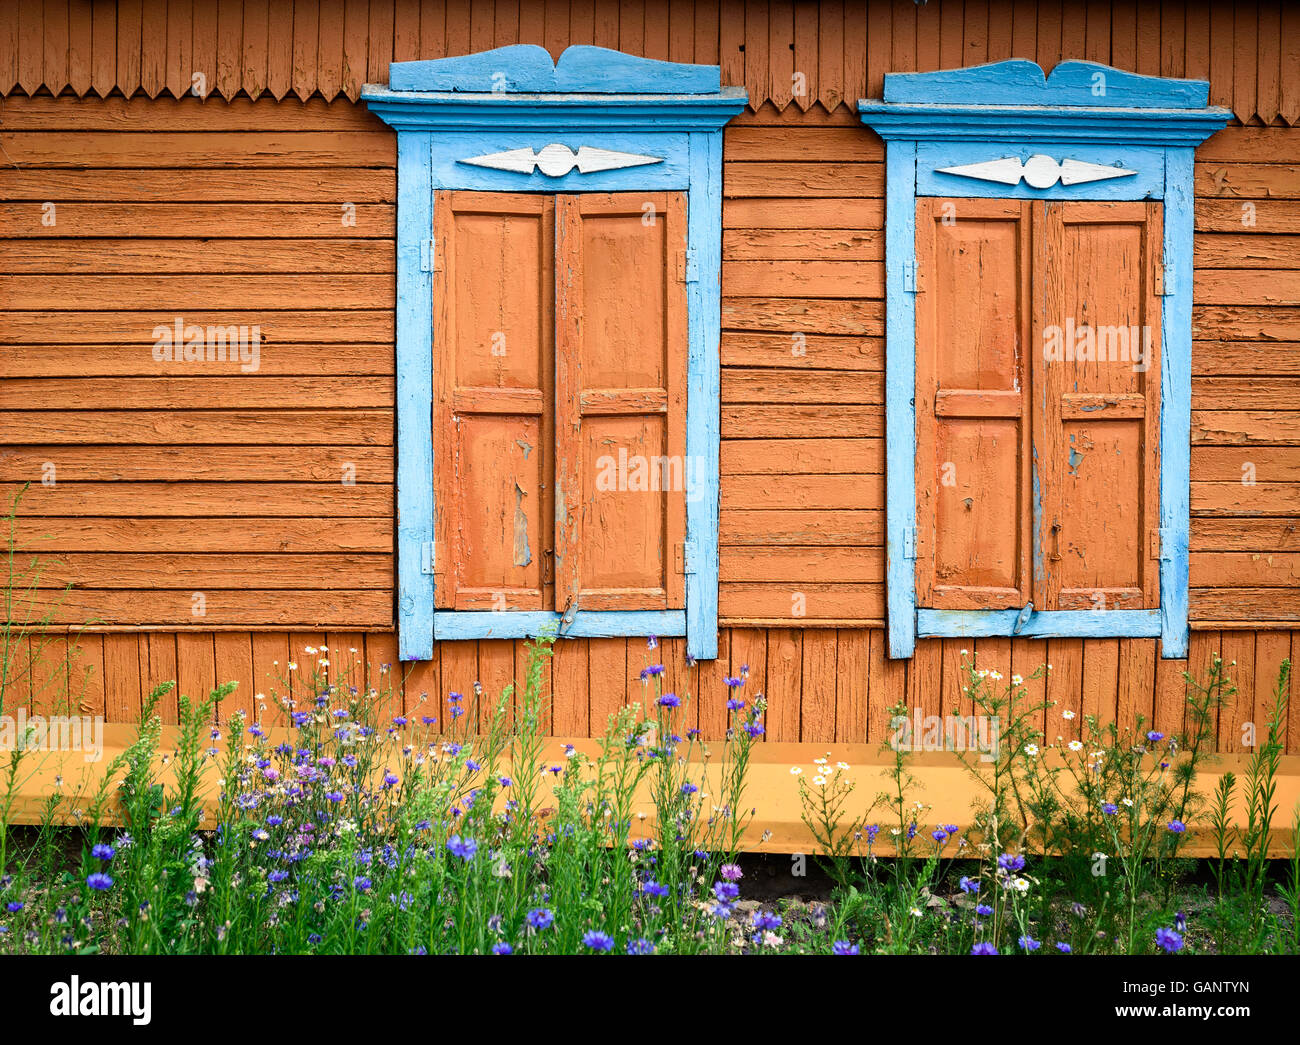 Two ornate hard carved wooden window frames in blue paint with closed orange hatches on a wood house exterior wall with flora Stock Photo